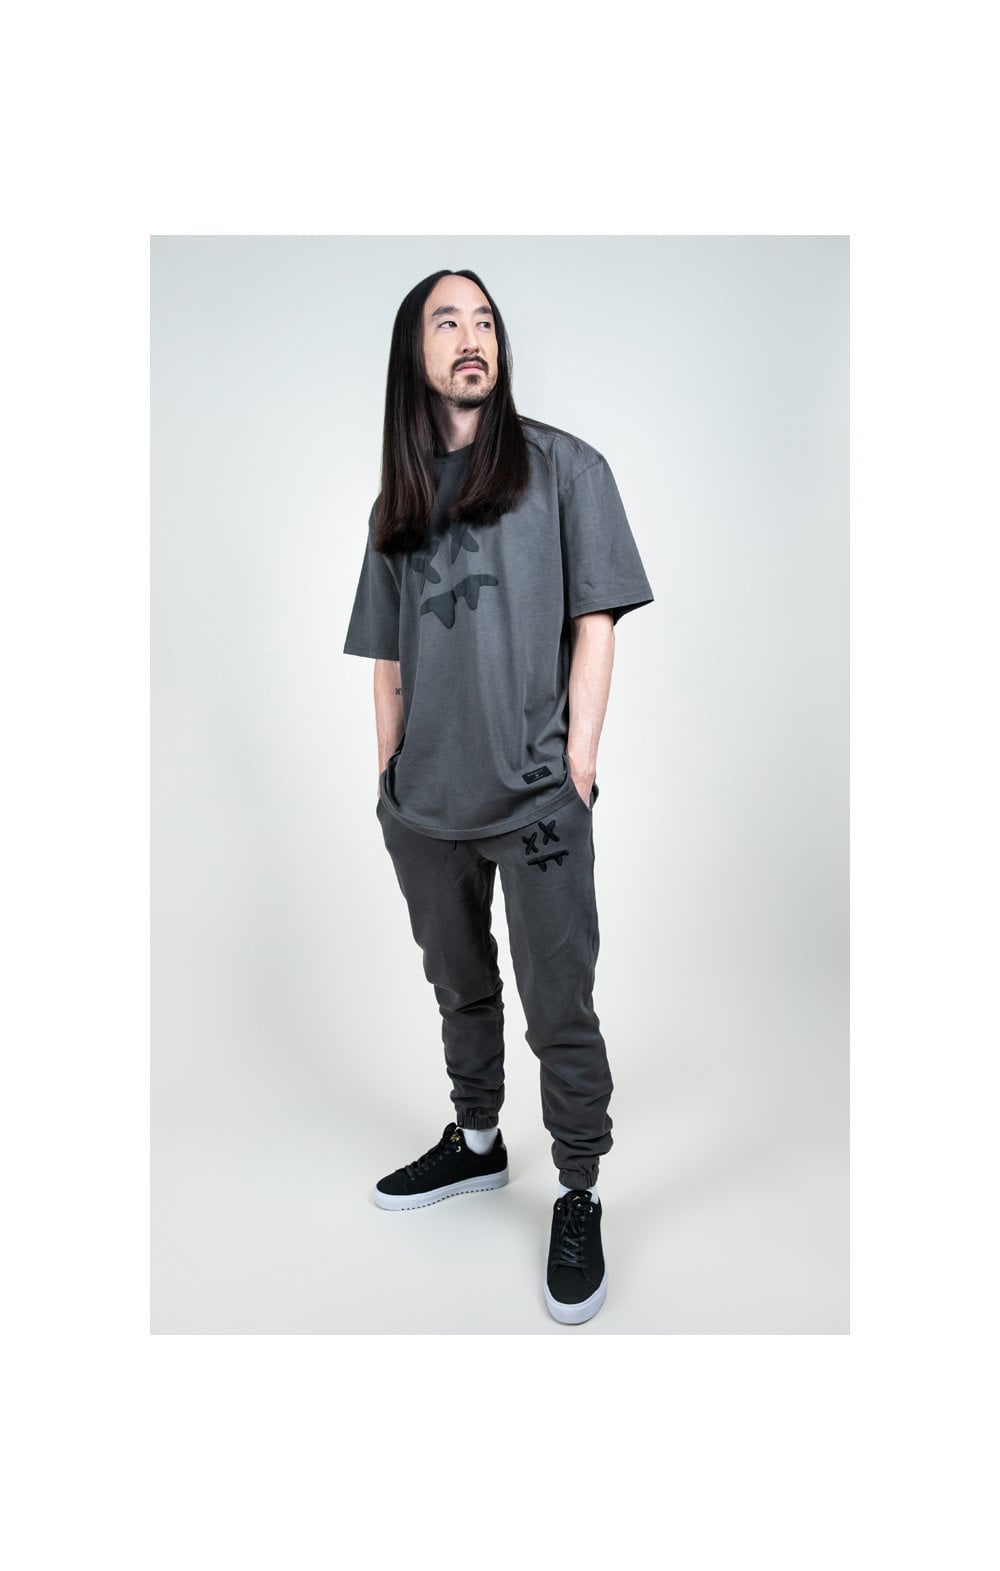 SikSilk X Steve Aoki S/S Oversize Essential Tee – Washed Grey (5)